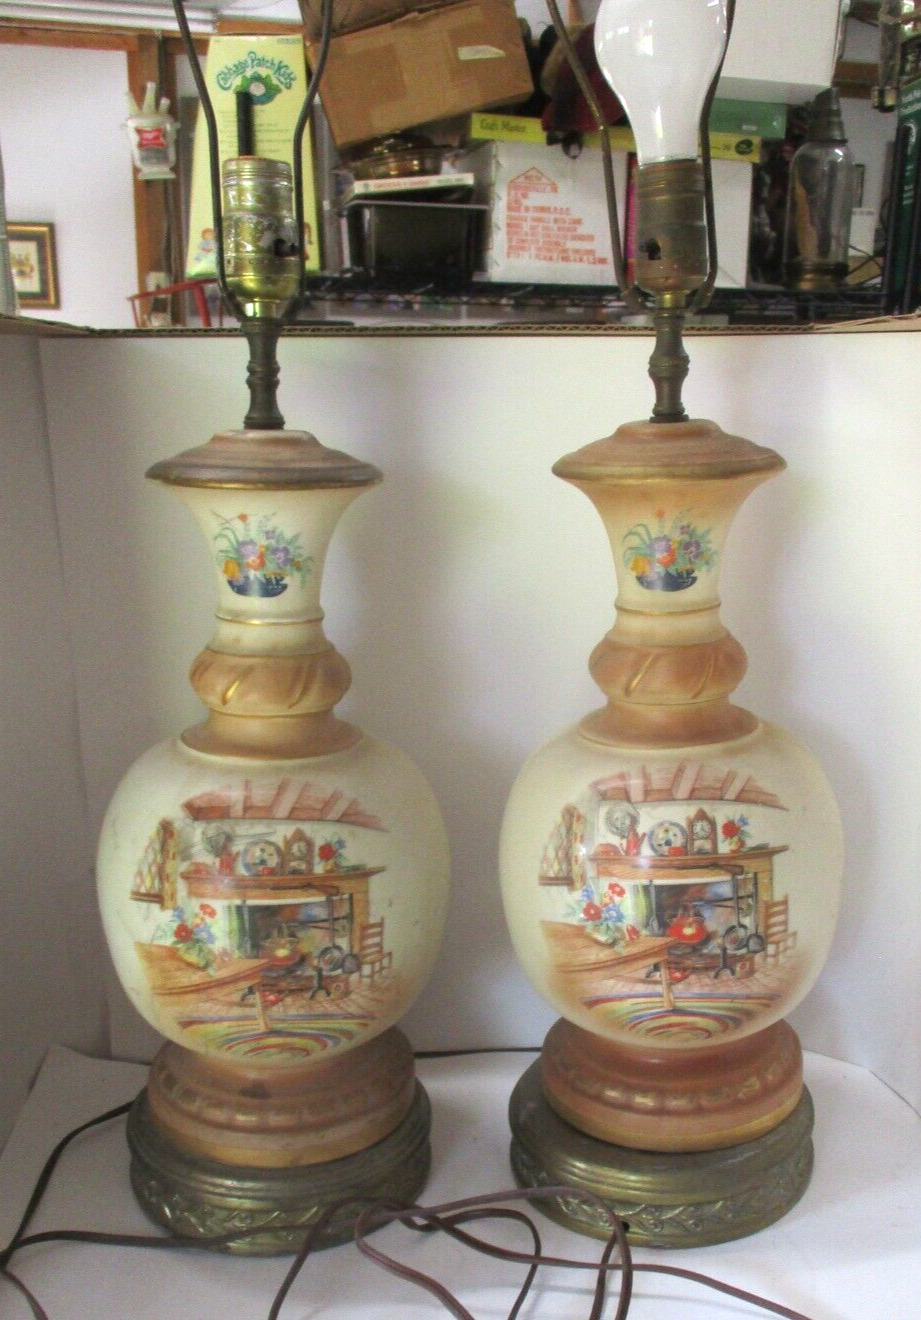 Pair of Ceramic Lamps with Hearth Kitchen Scenes